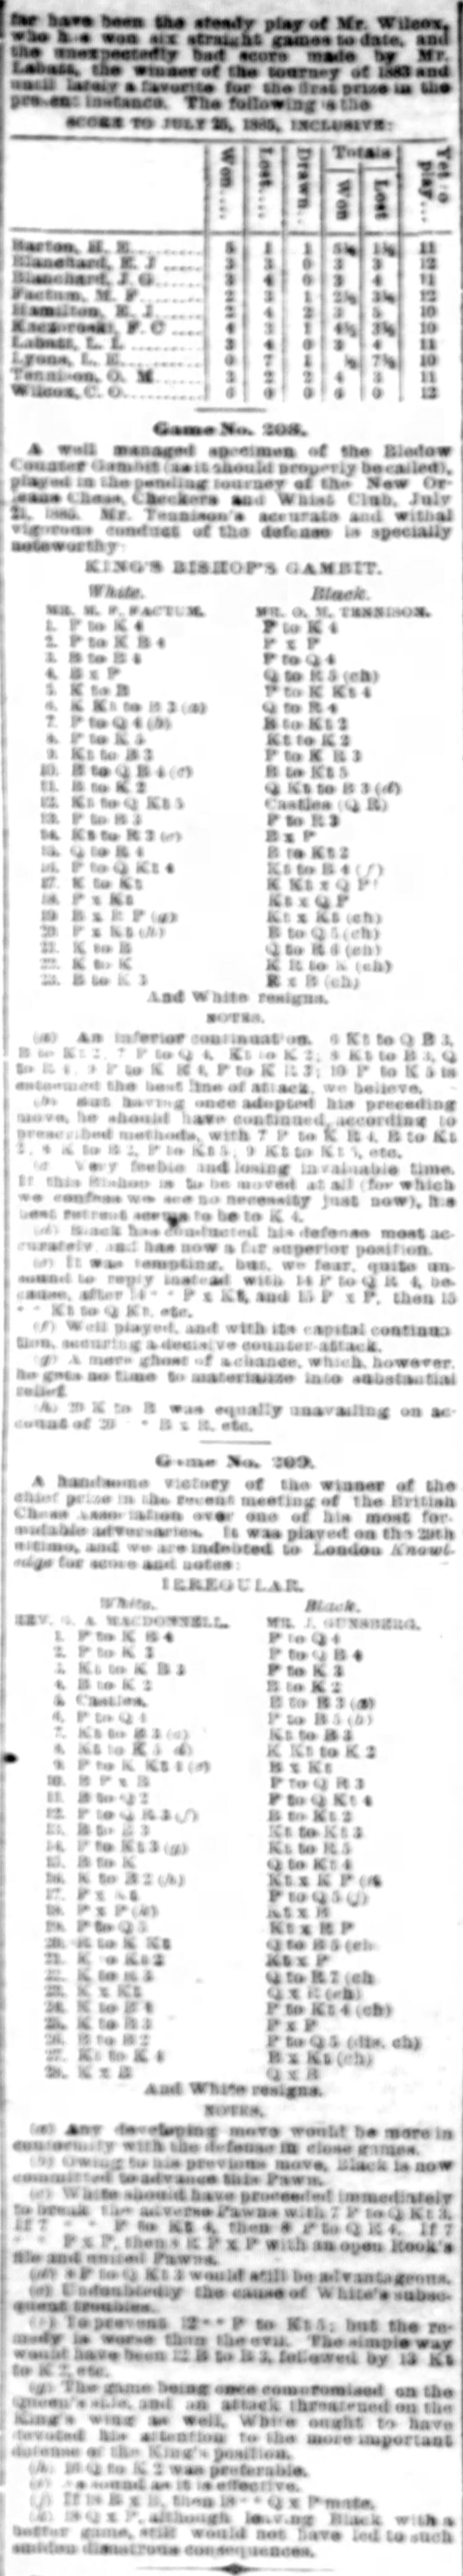 1885.07.26-02 New Orleans Times-Democrat.png